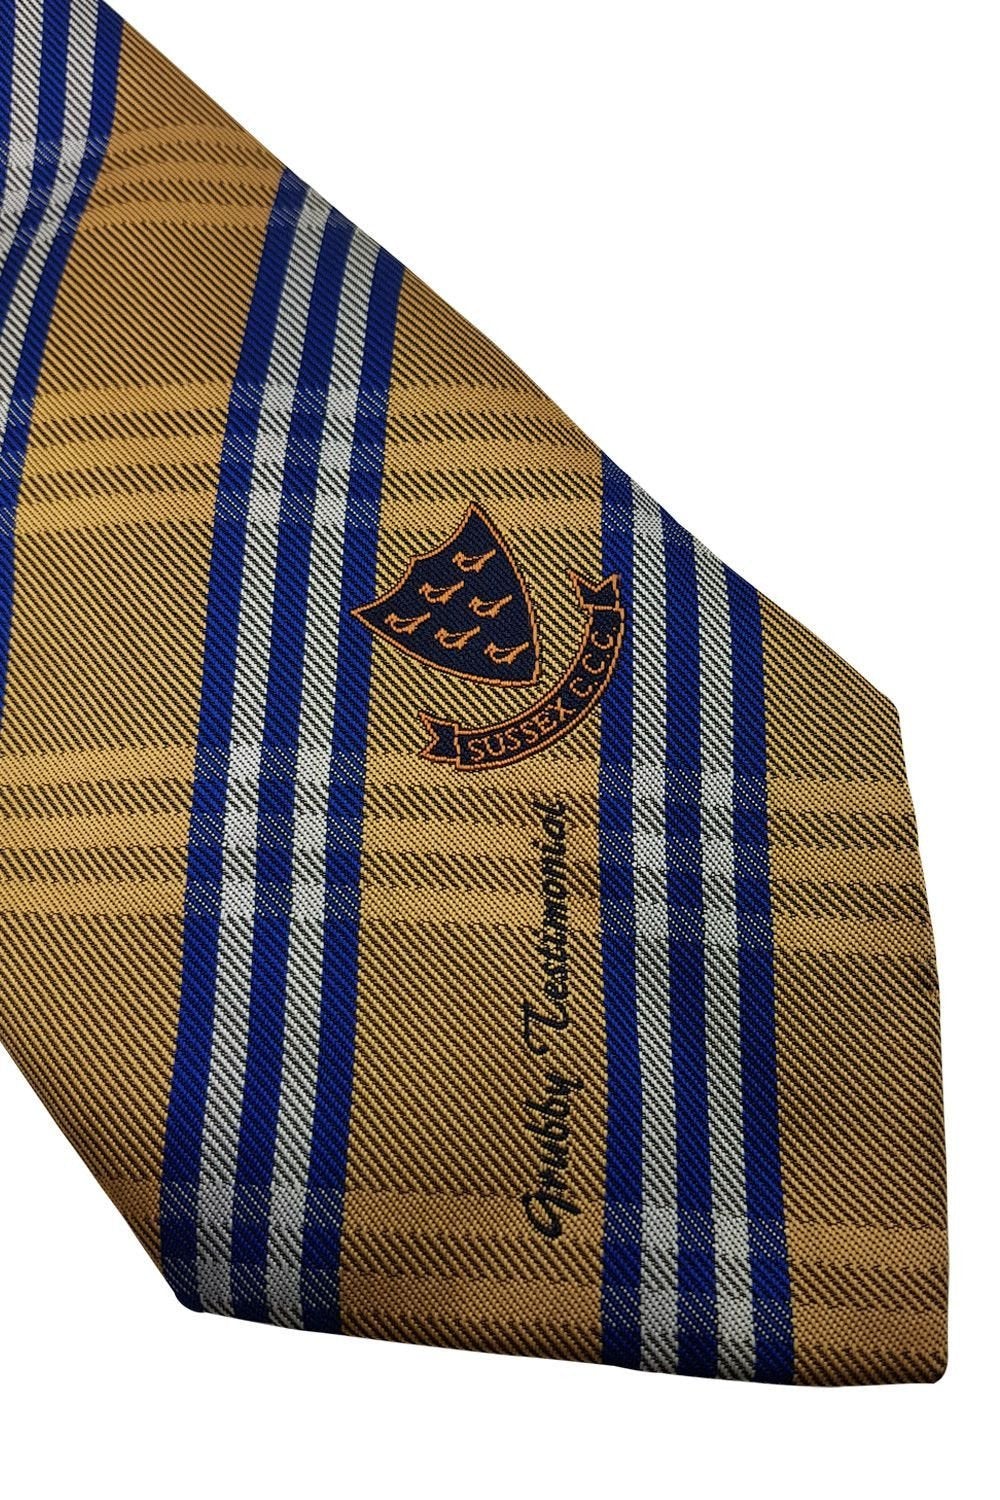 ALLEZ Sussex County Cricket Club Gold Checked Tie (59")-Allez-The Freperie